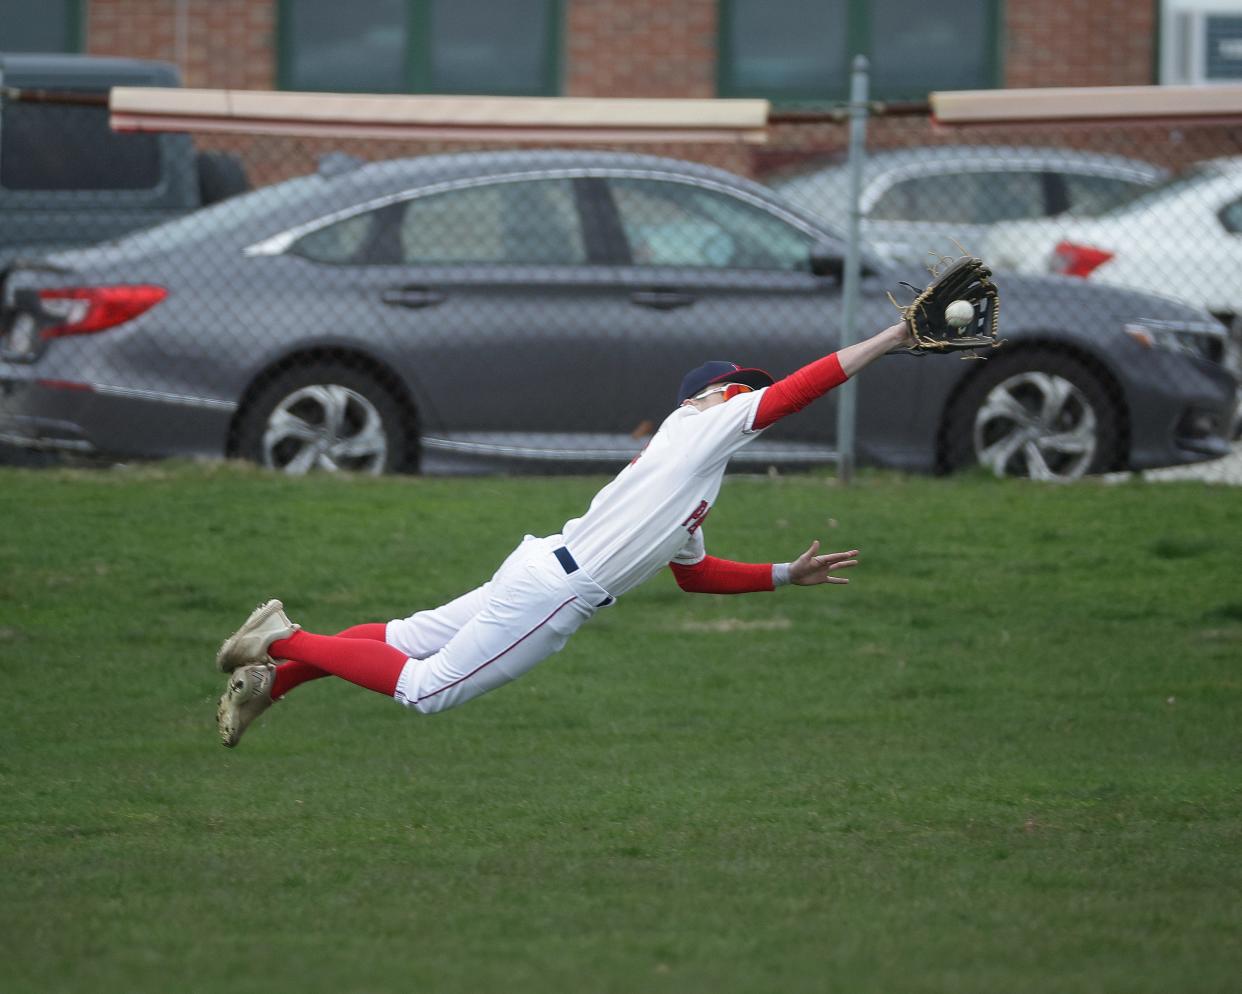 Portsmouth's Matt Nolan making a diving catch during a game last month.